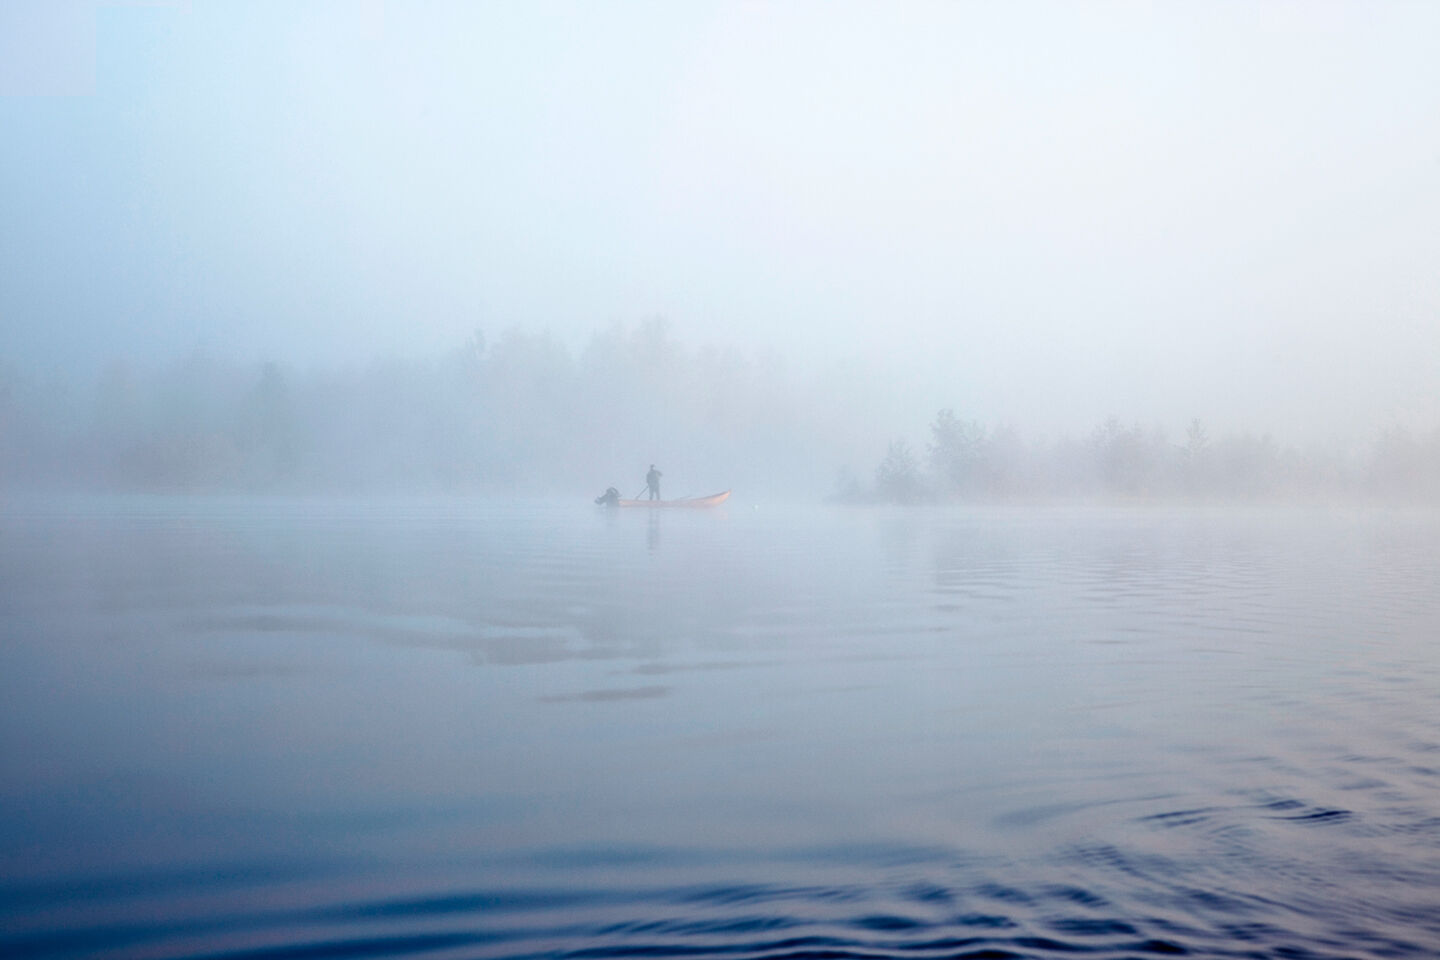 Filming on open water is easy in Finland with Everyman's Right -- no film permit needed